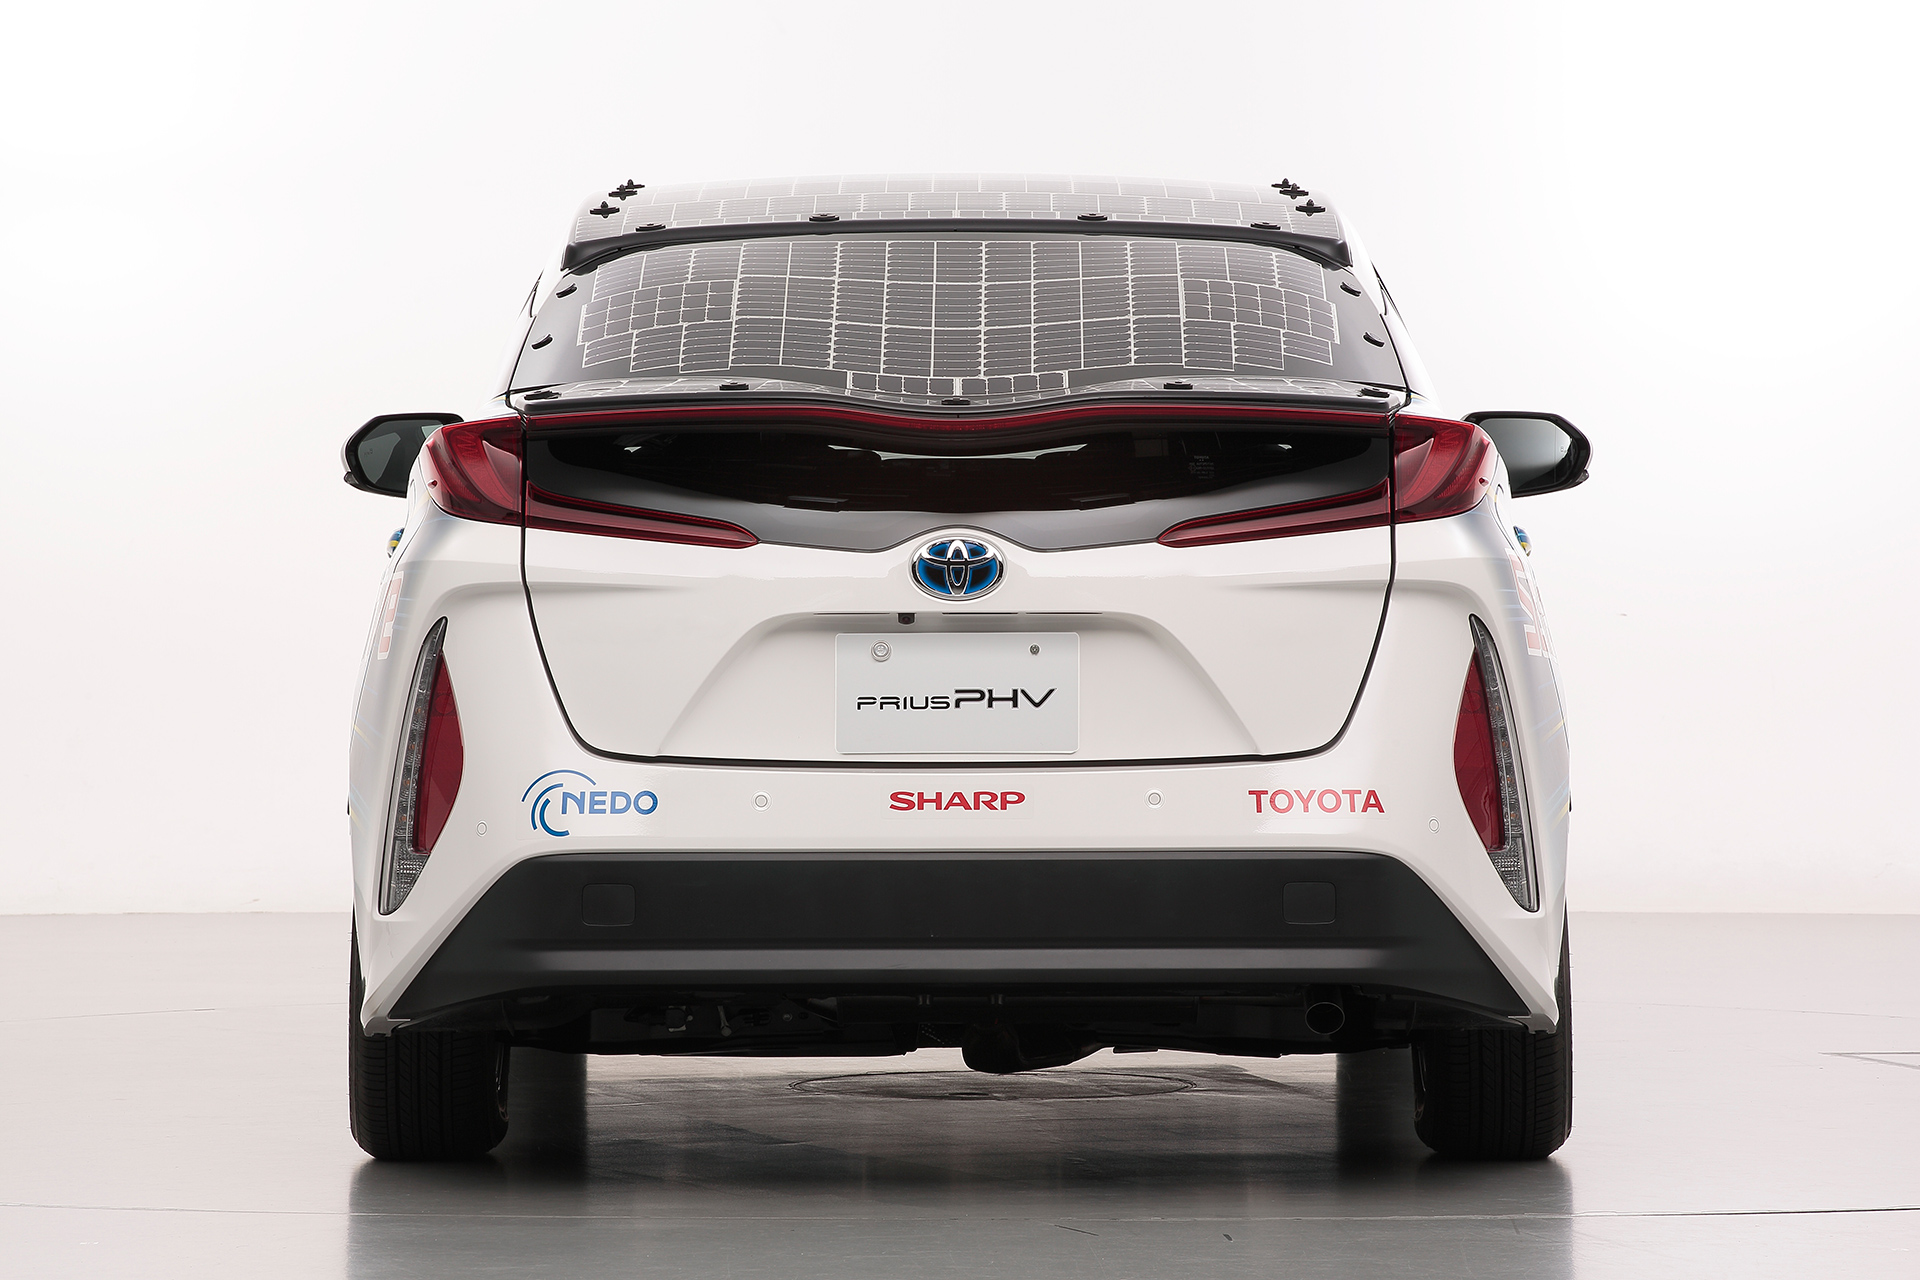 toyota-prius-prime-phv-test-vehicle-with-solar-panels-in-japan_100707142_h.jpg